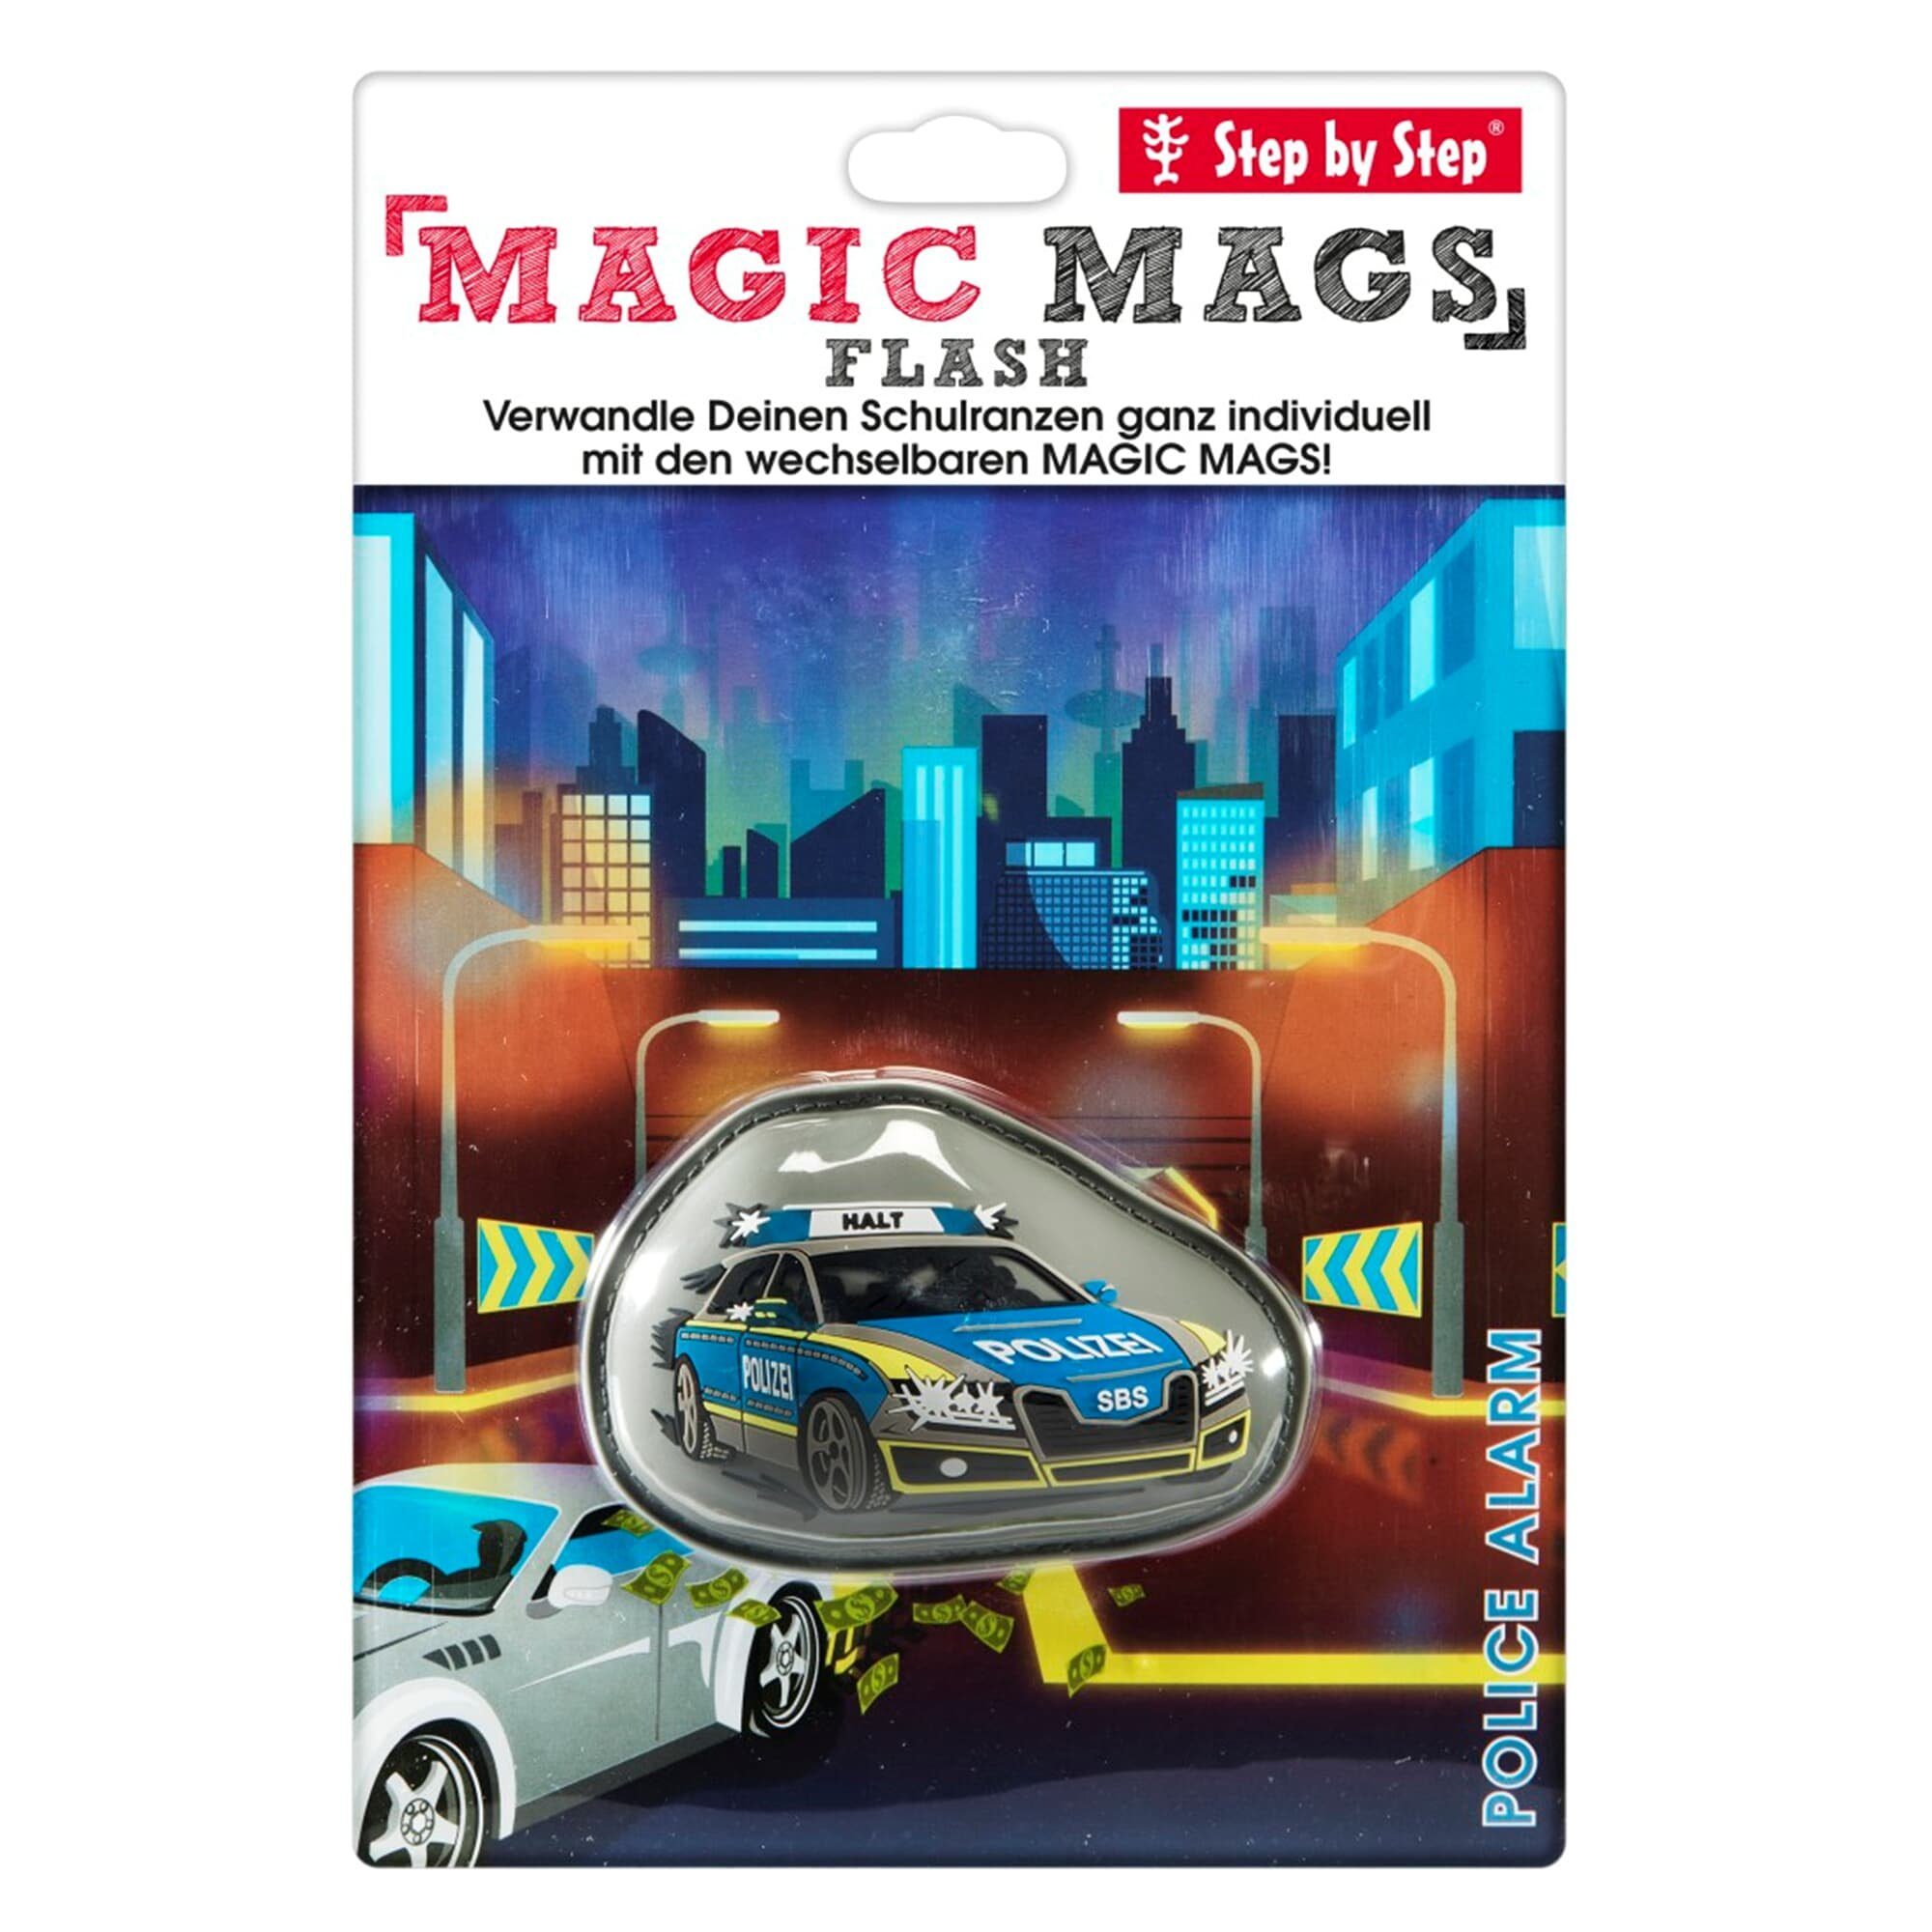 MAGIC MAGS Alarm by Step Schulranzen Rick Police Step